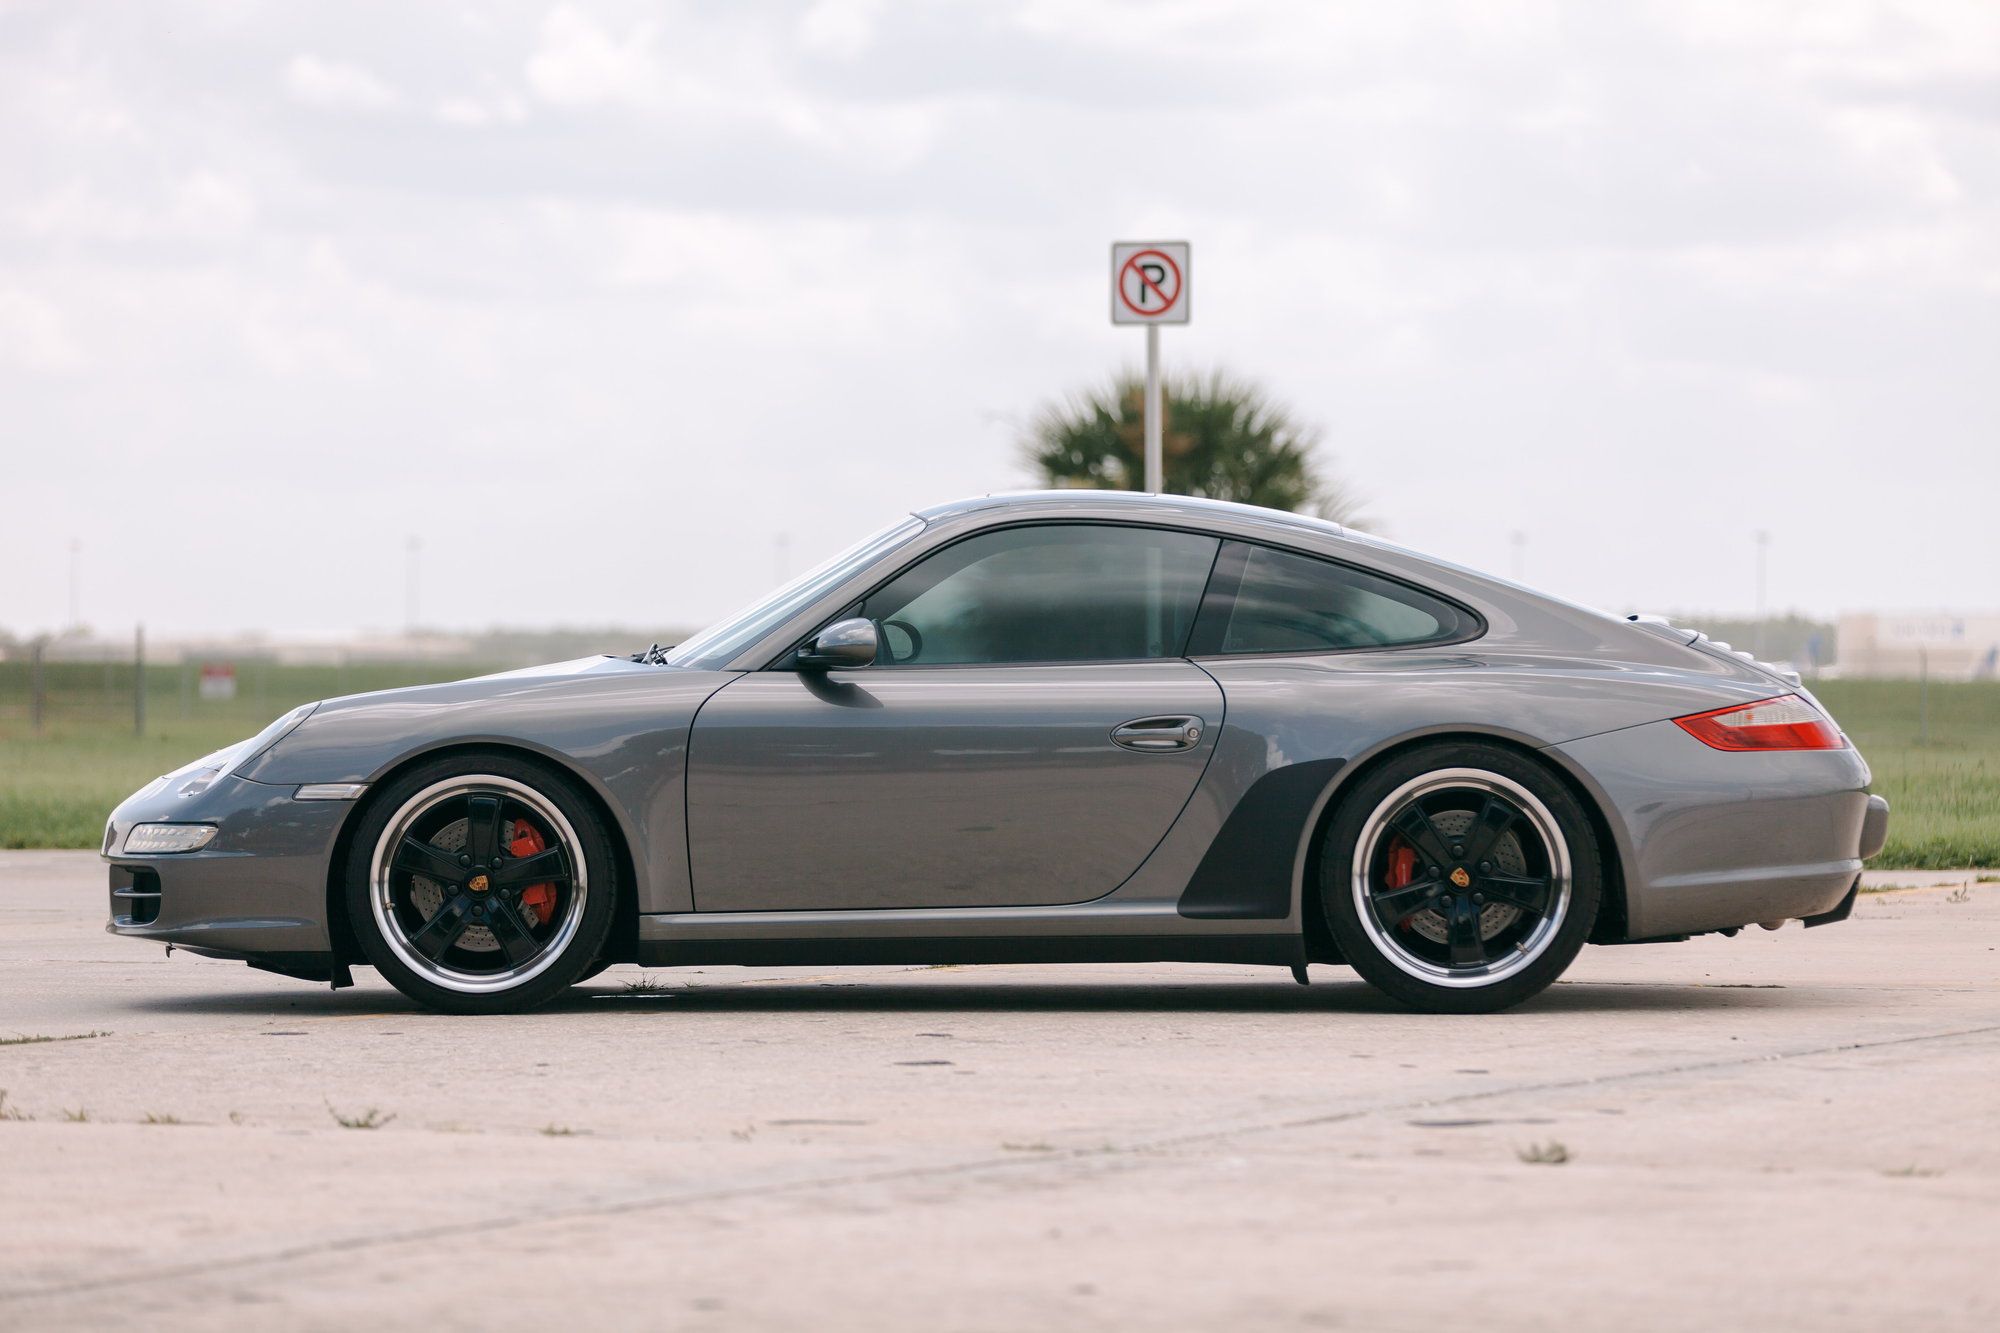 2007 Porsche 911 - 2007 Porsche 911 Carrera 4S Manual - Meteor Grey 997 with Black Leather - Used - VIN WP0AB29907S732610 - 48,975 Miles - 6 cyl - AWD - Manual - Coupe - Gray - Orlando, FL 32824, United States